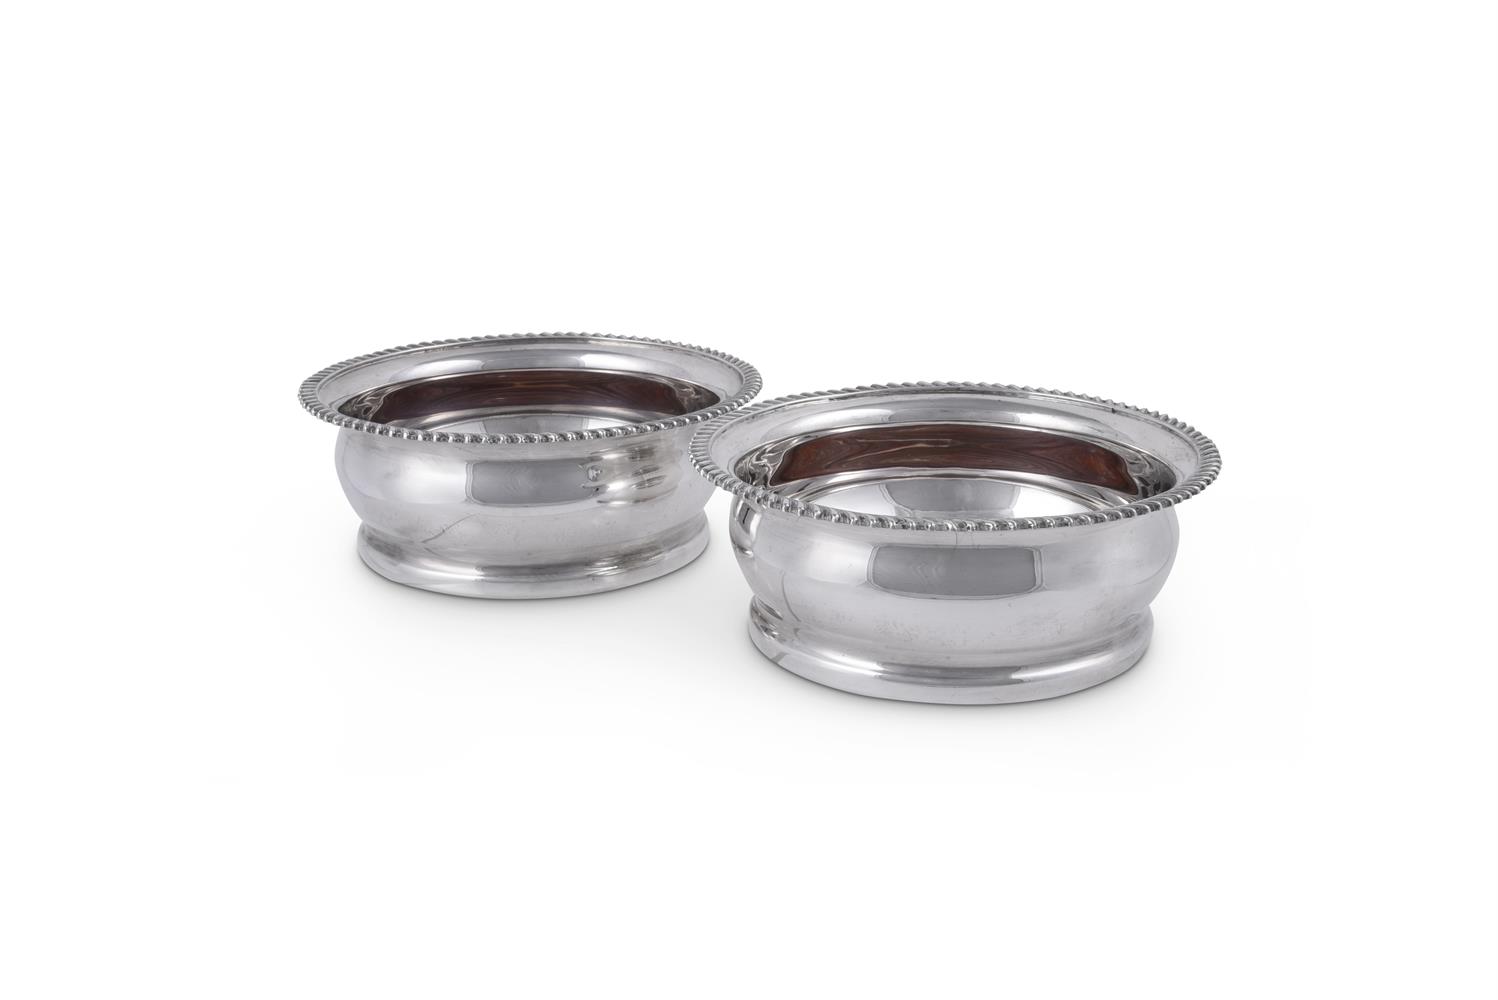 A PAIR OF SILVER CIRCULAR WINE COASTERS BY CAMELOT SILVERWARE LTD